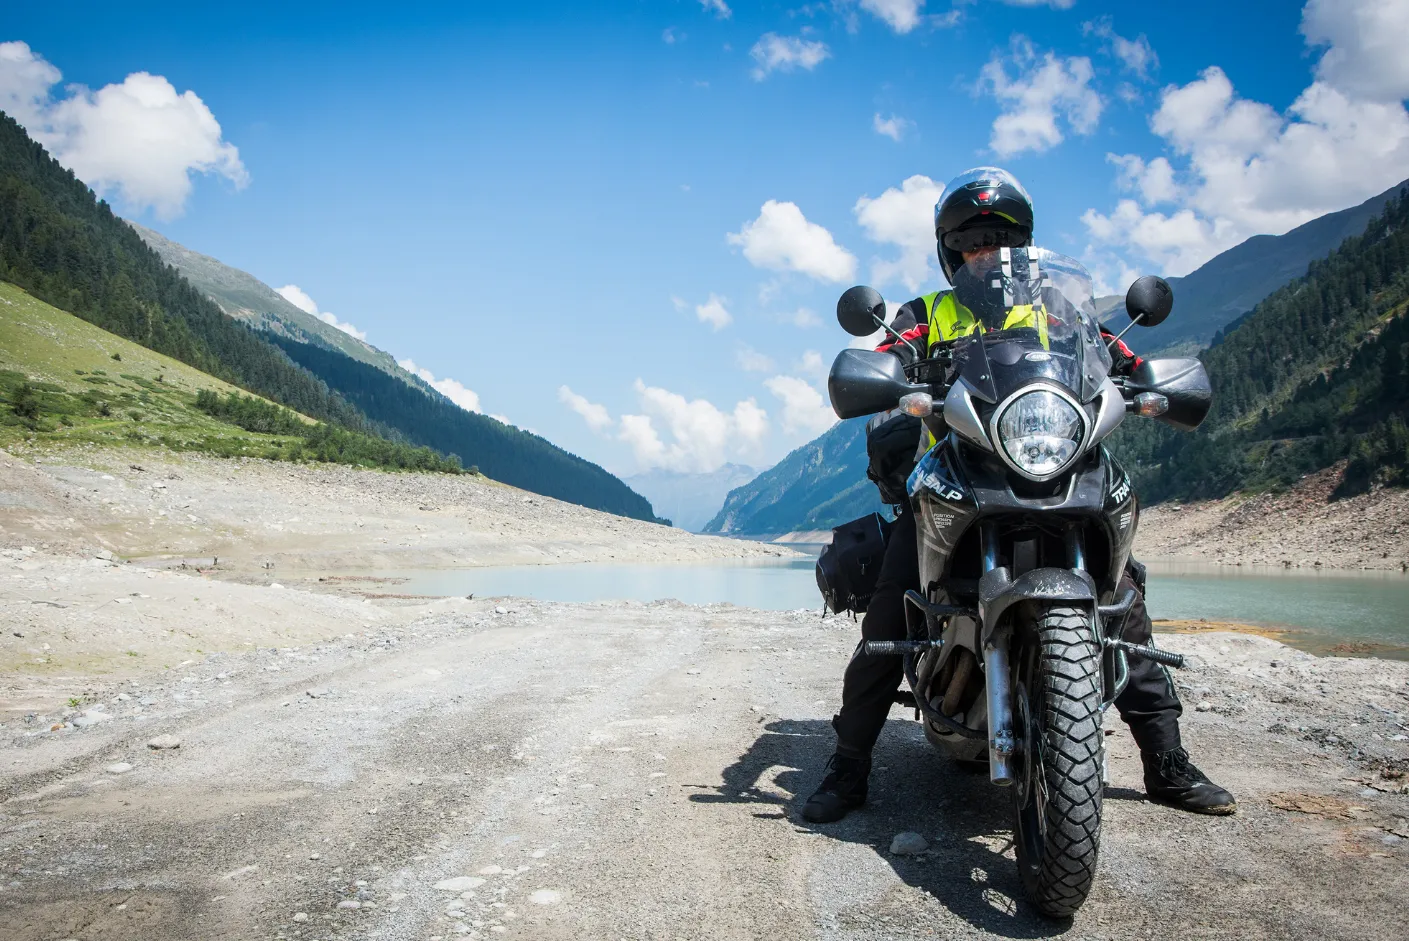 This is a Study guide of motorcycle knowledge test practice of Canada